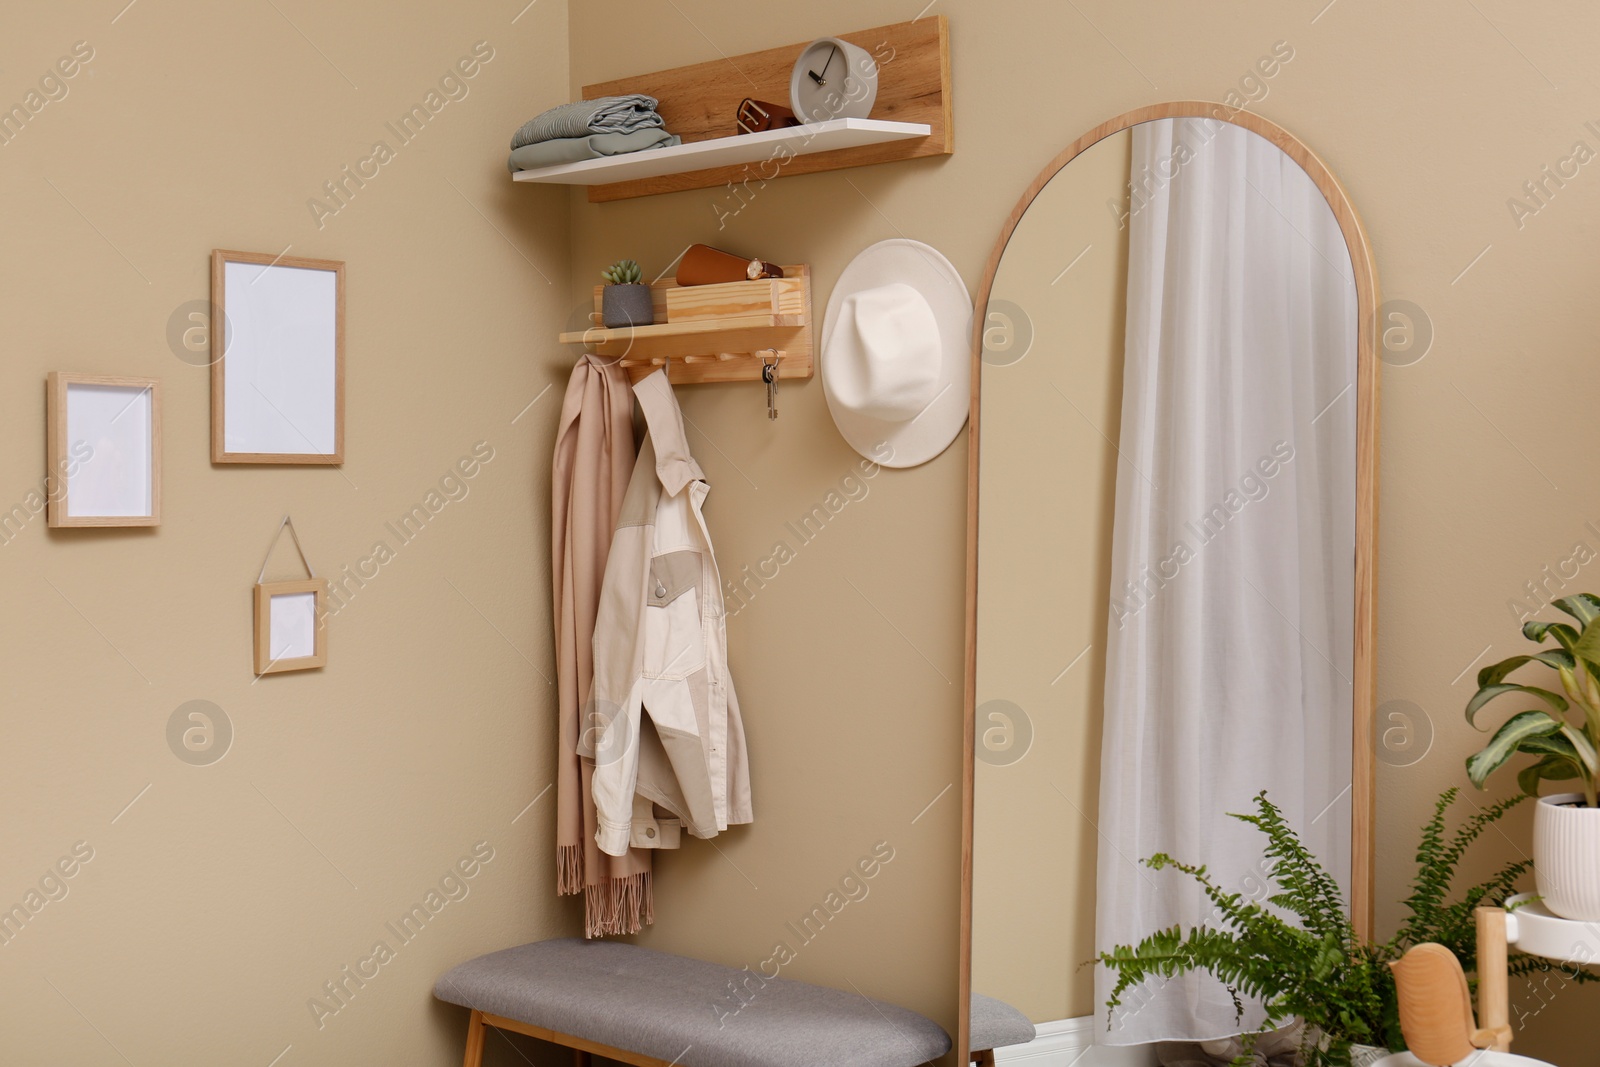 Photo of Hallway interior with stylish furniture, accessories and wooden hanger for keys on beige wall